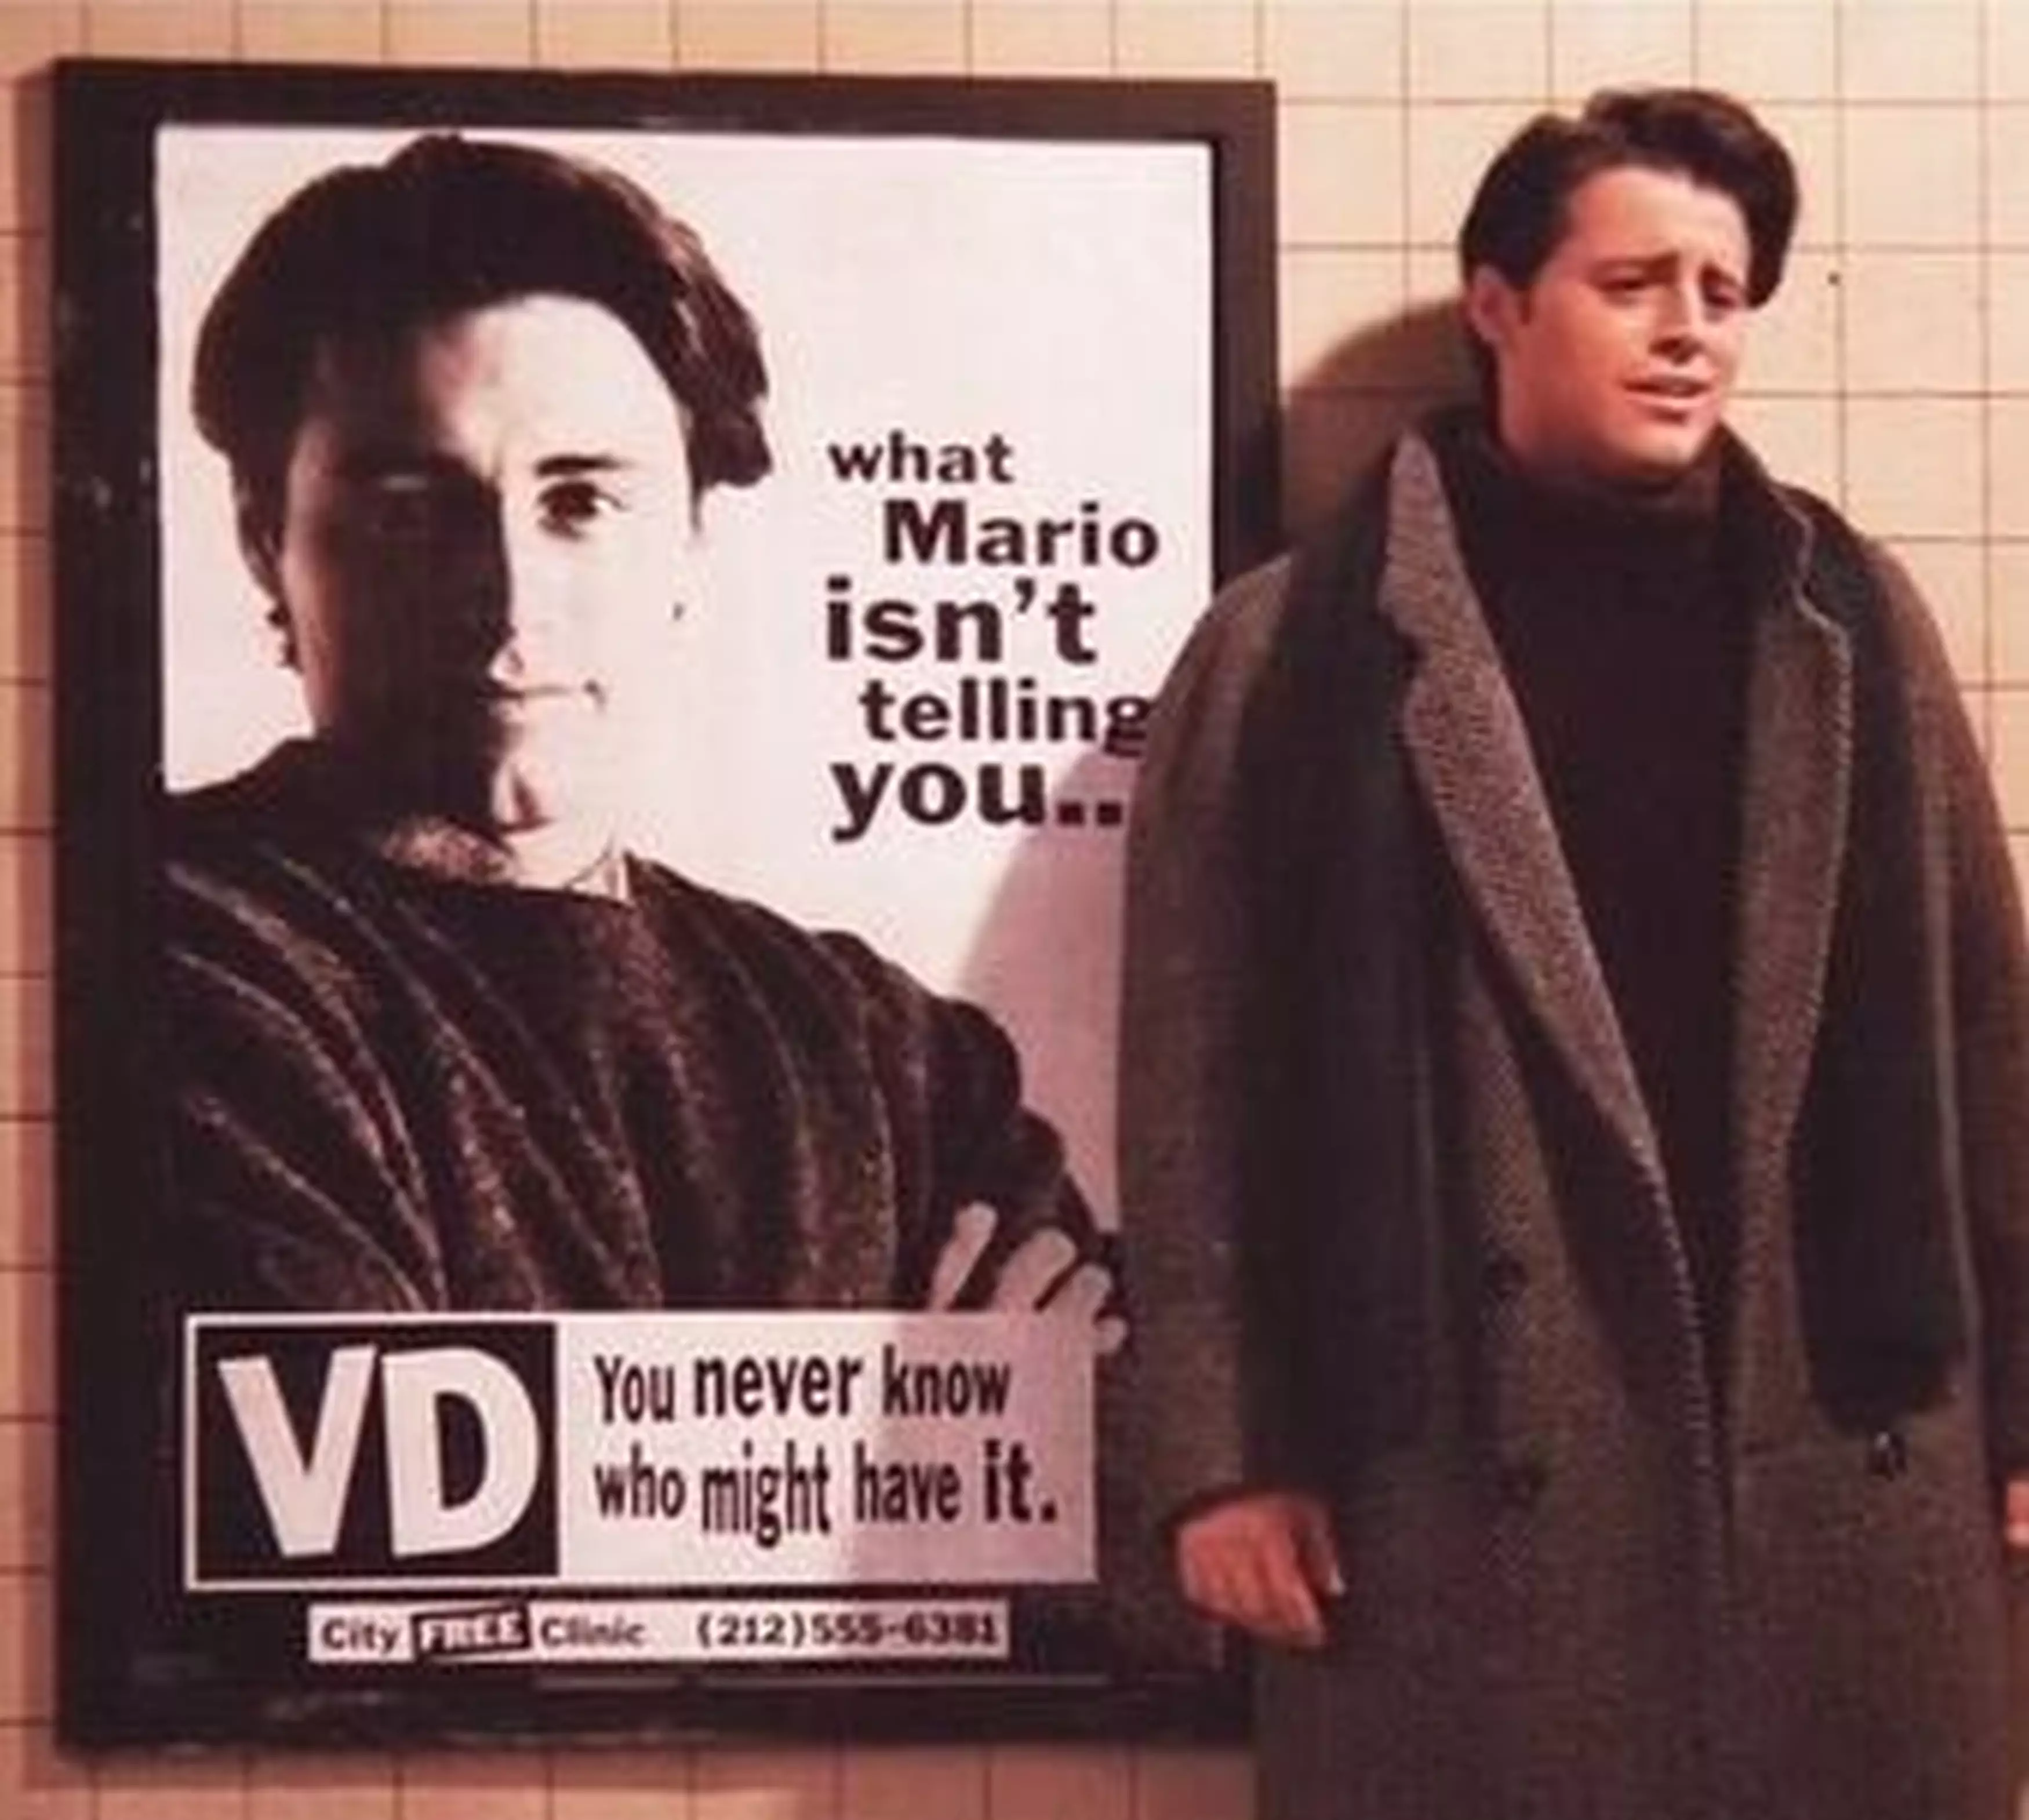 Joey was less happy to see his face as part of the venereal disease campaign (